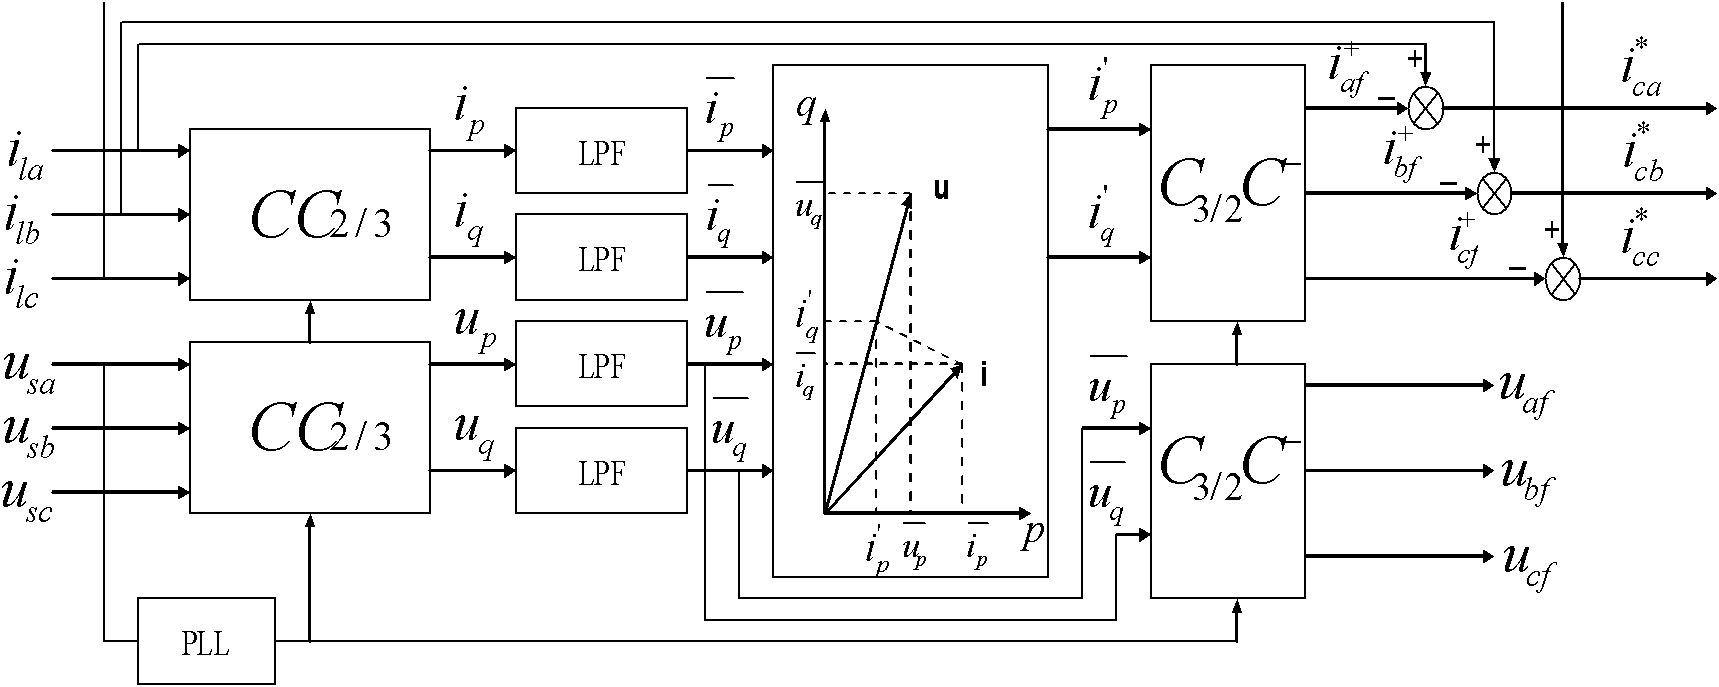 Method for detecting harmonic wave and reactive current based on spatial transformation of voltage vectors